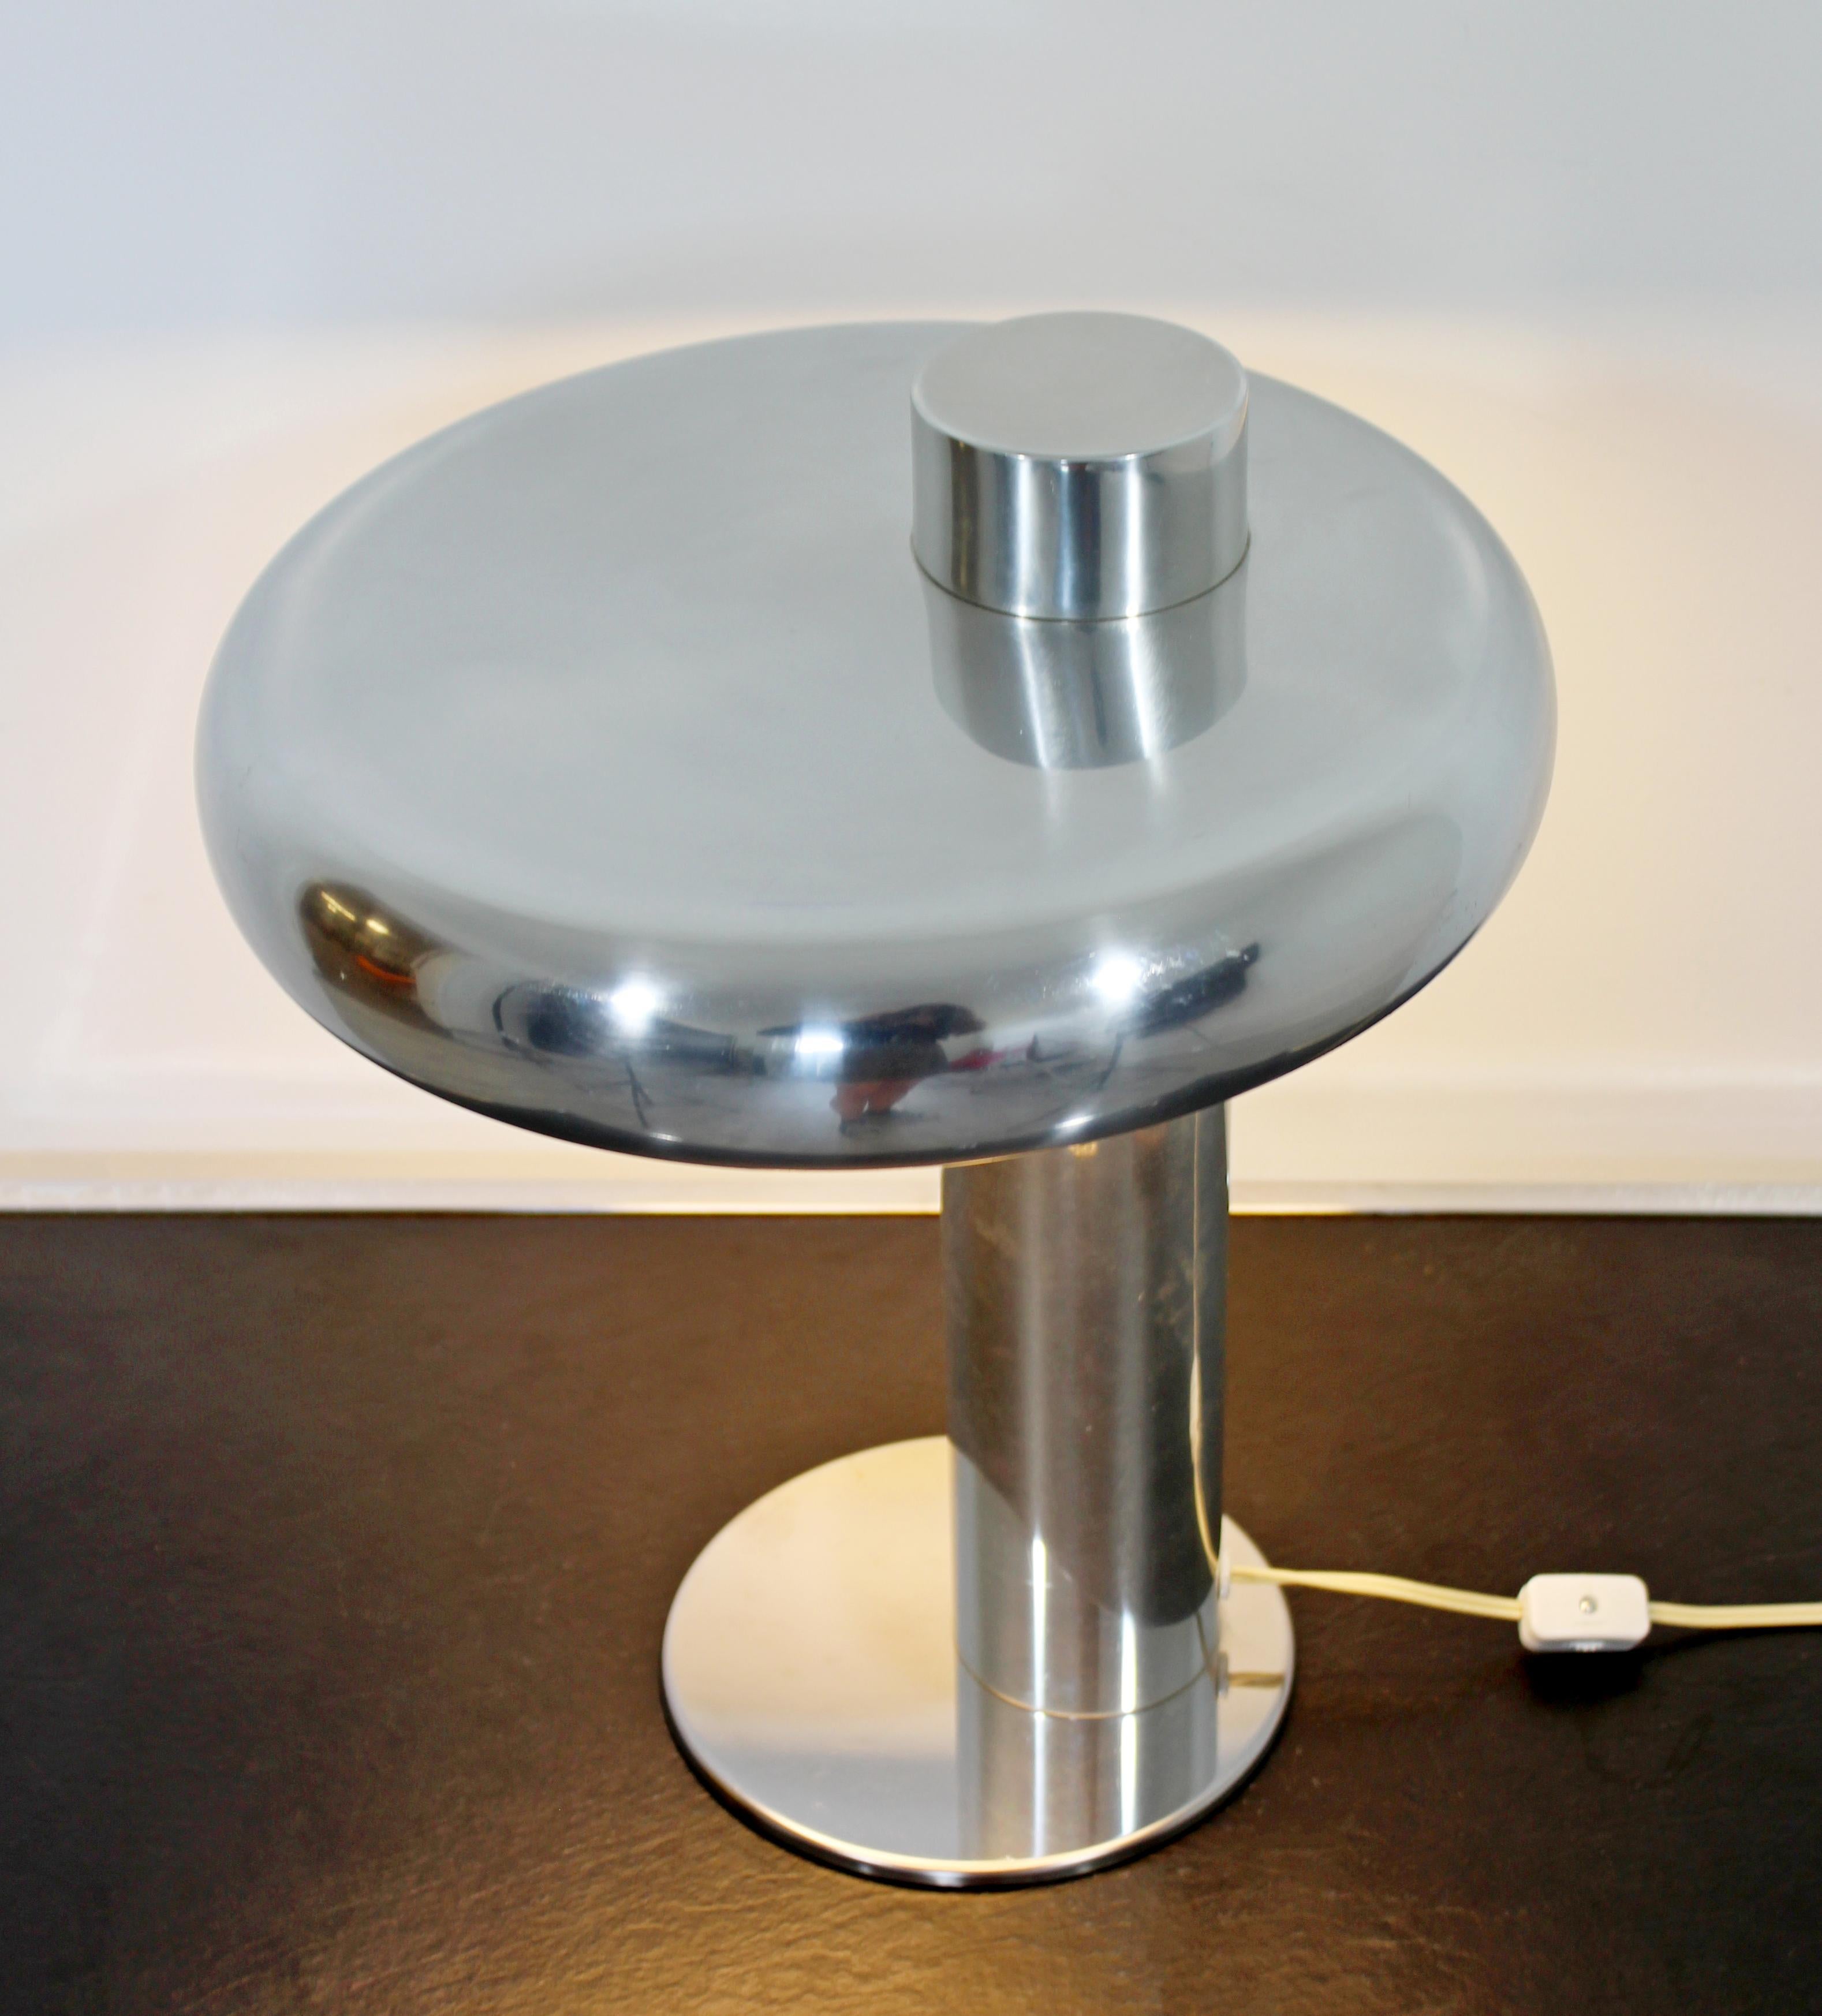 For your consideration is a chic, polished aluminum, reading table lamp, by Koch & Lowy, circa the 1970s. In very good vintage condition. The dimensions are 12